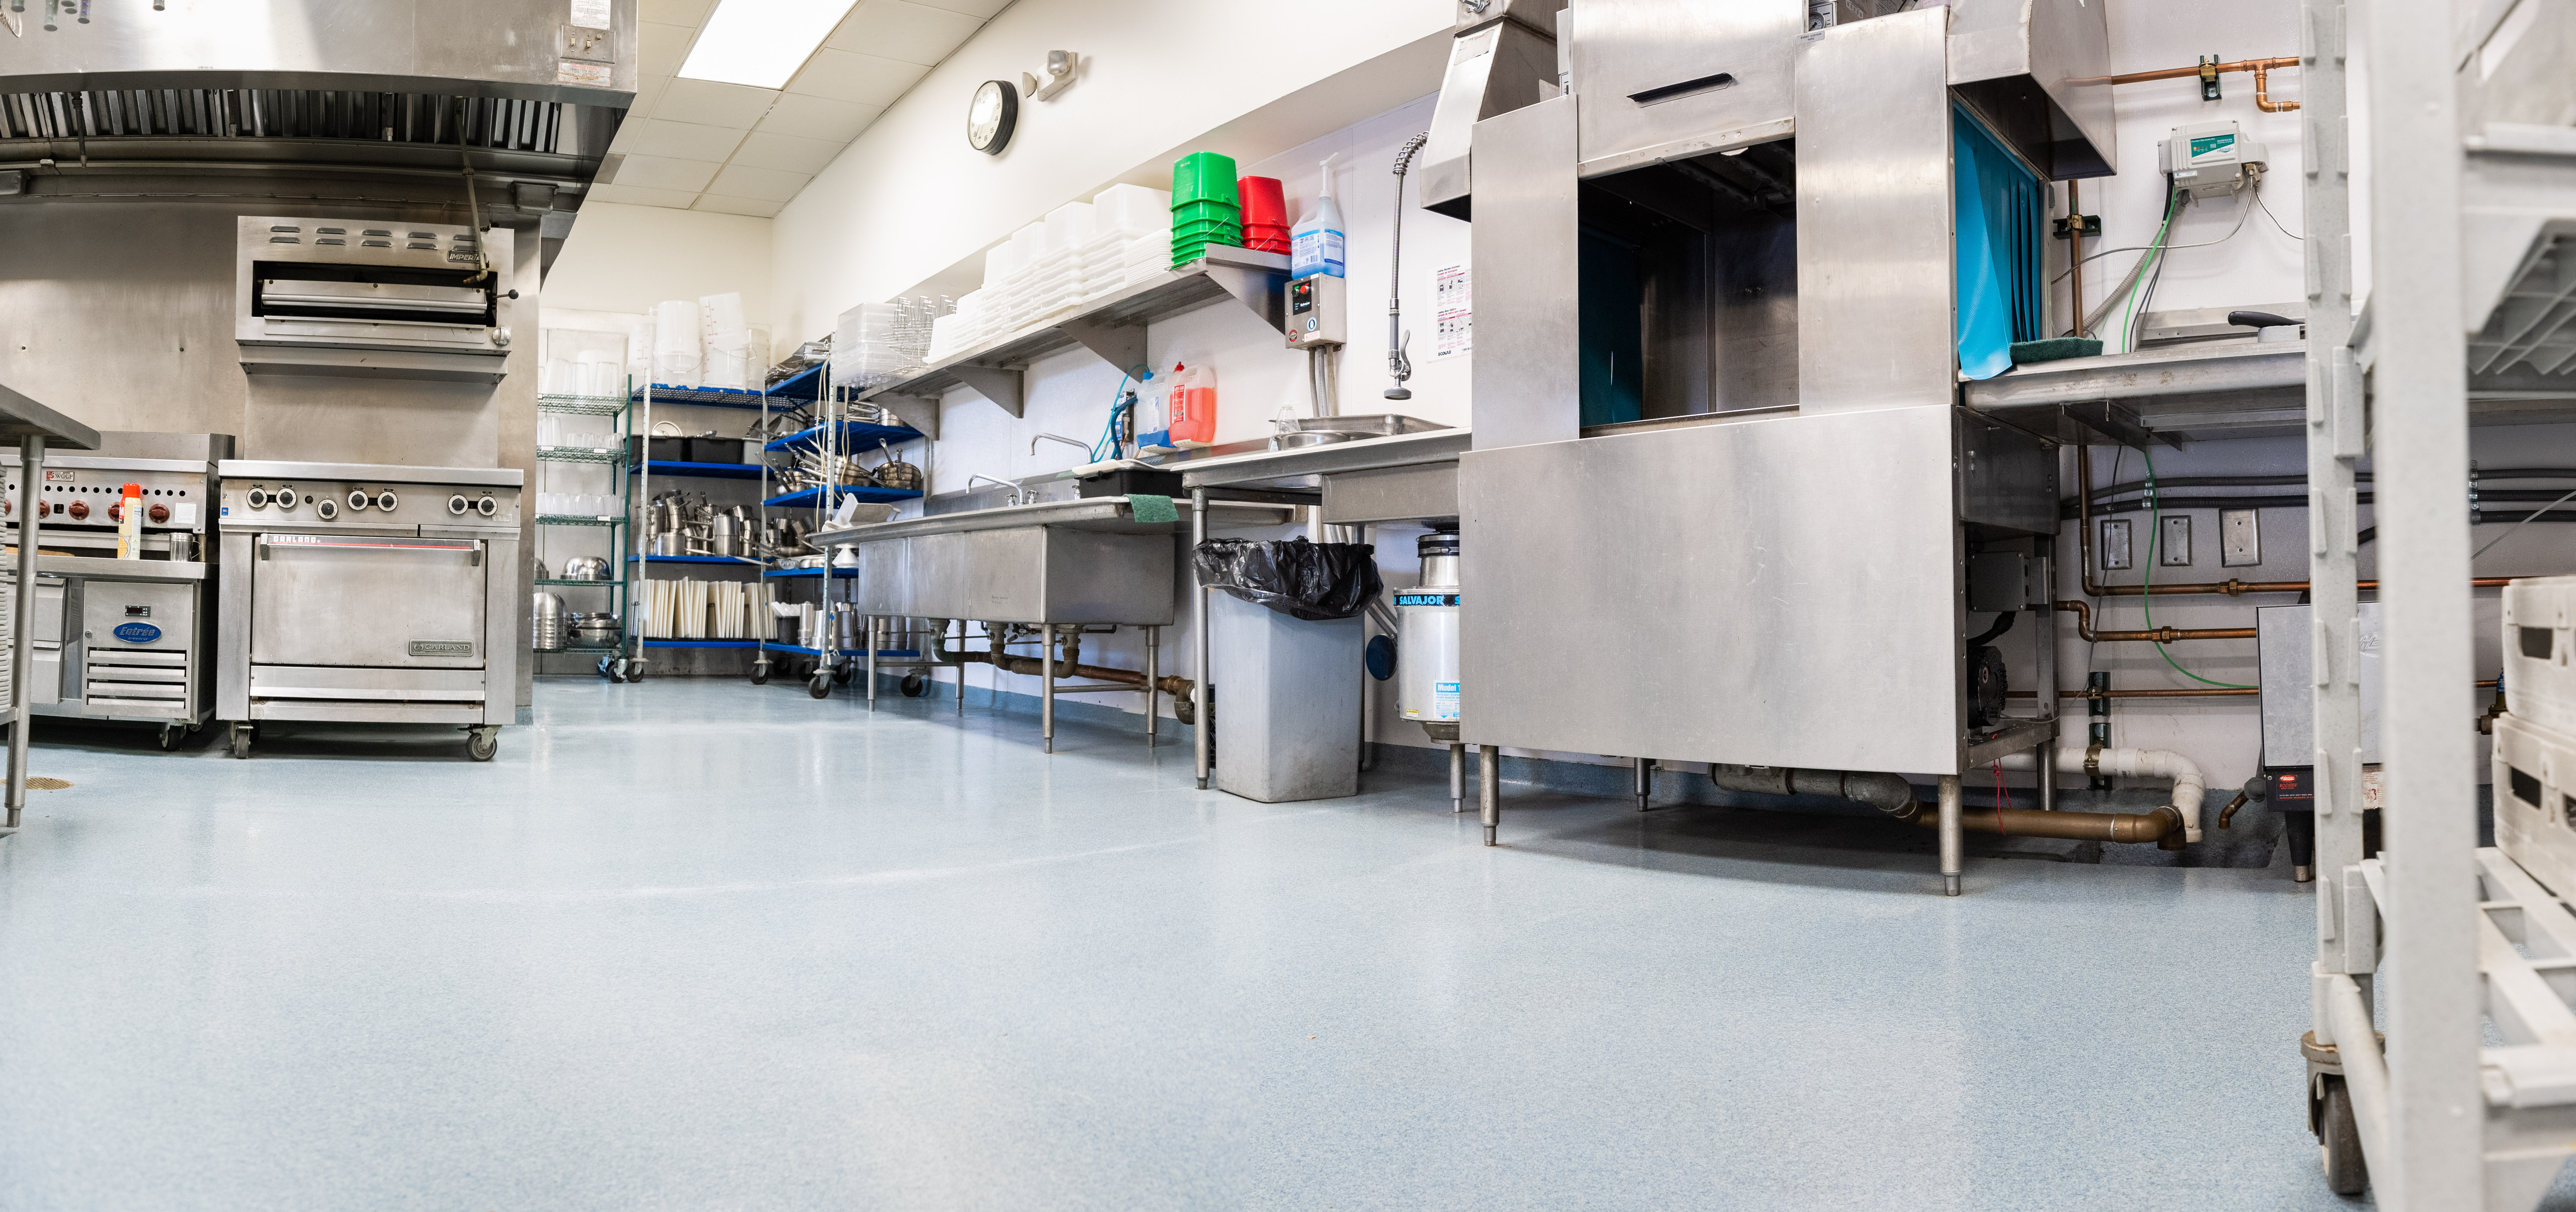 A new floor was installed in the Culinary Arts Building kitchen